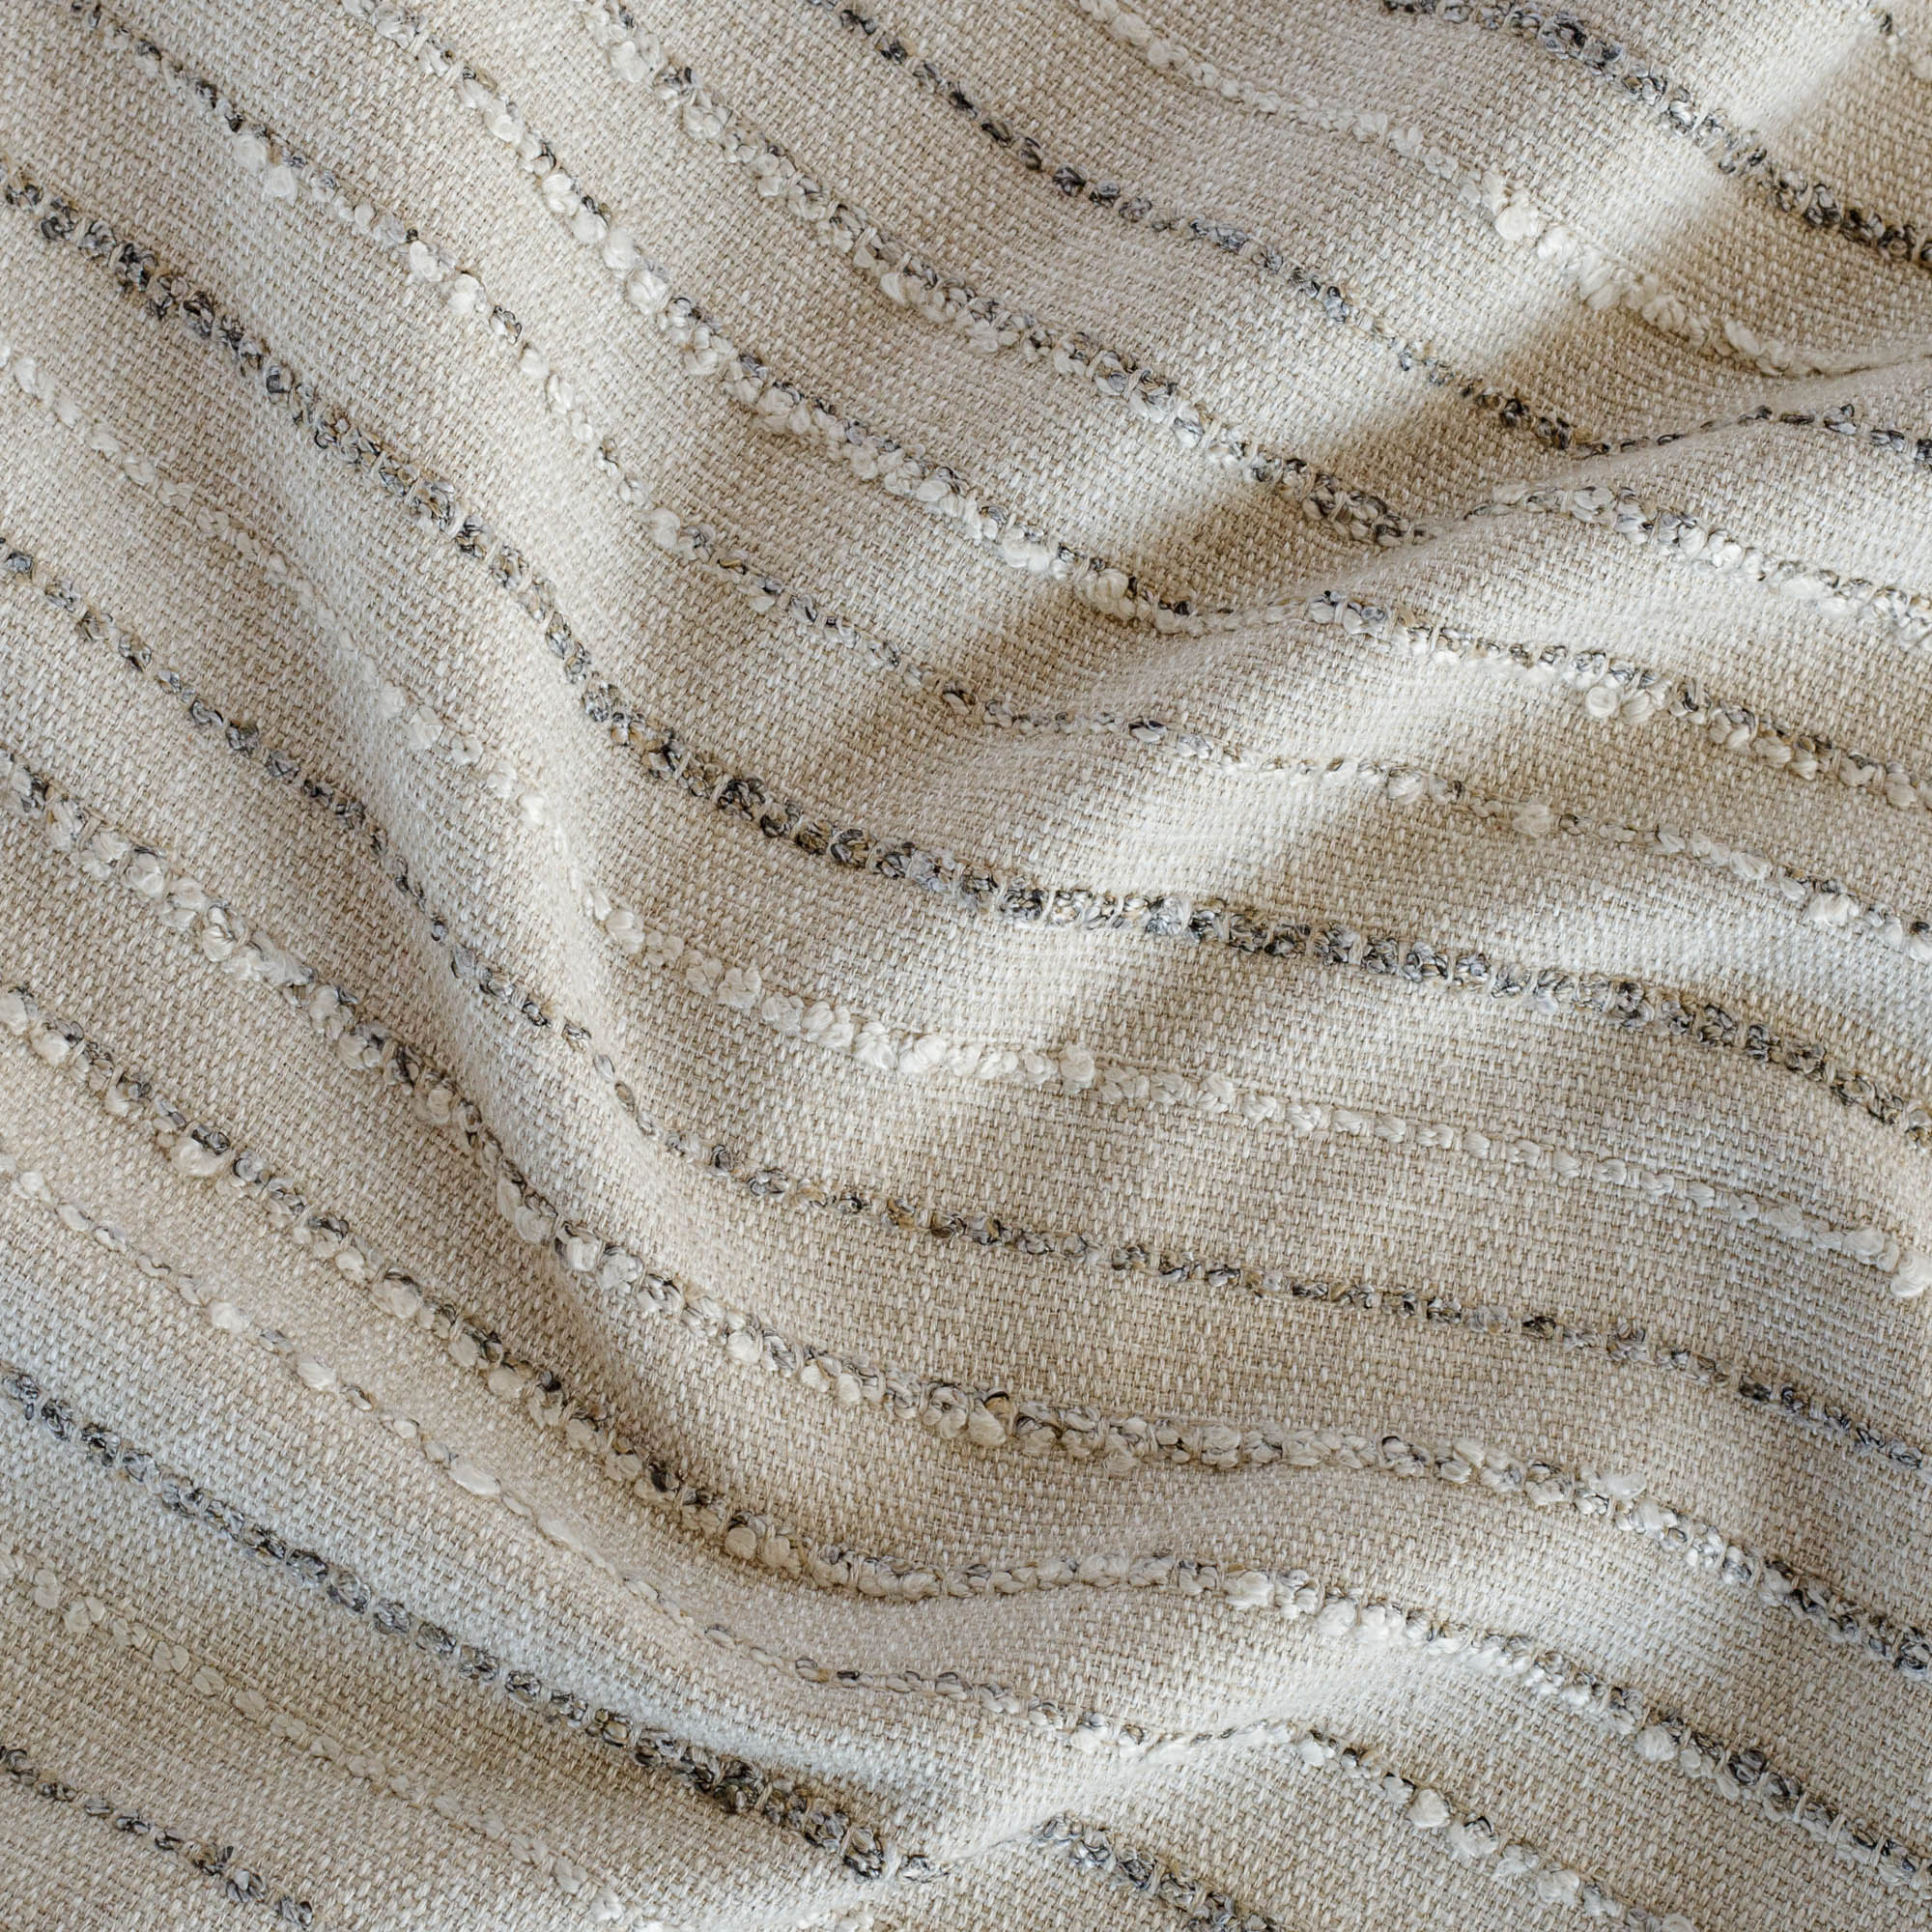 Wren Cobblestone fabric, an earth toned textured striped multi-use fabric from Tonic Living